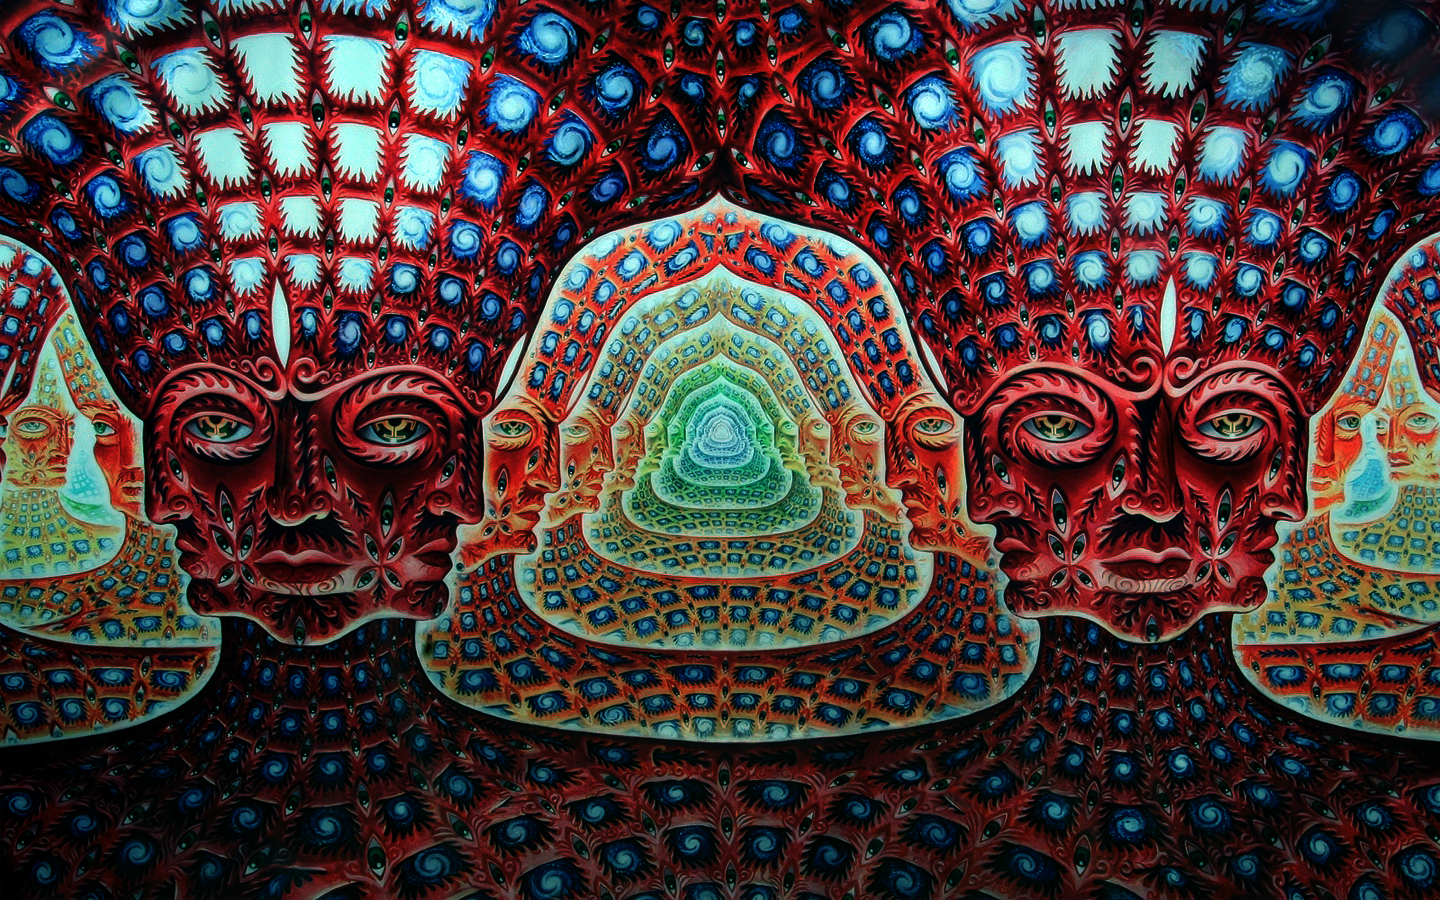 Tool alex grey wallpaper - - High Quality and Resolution